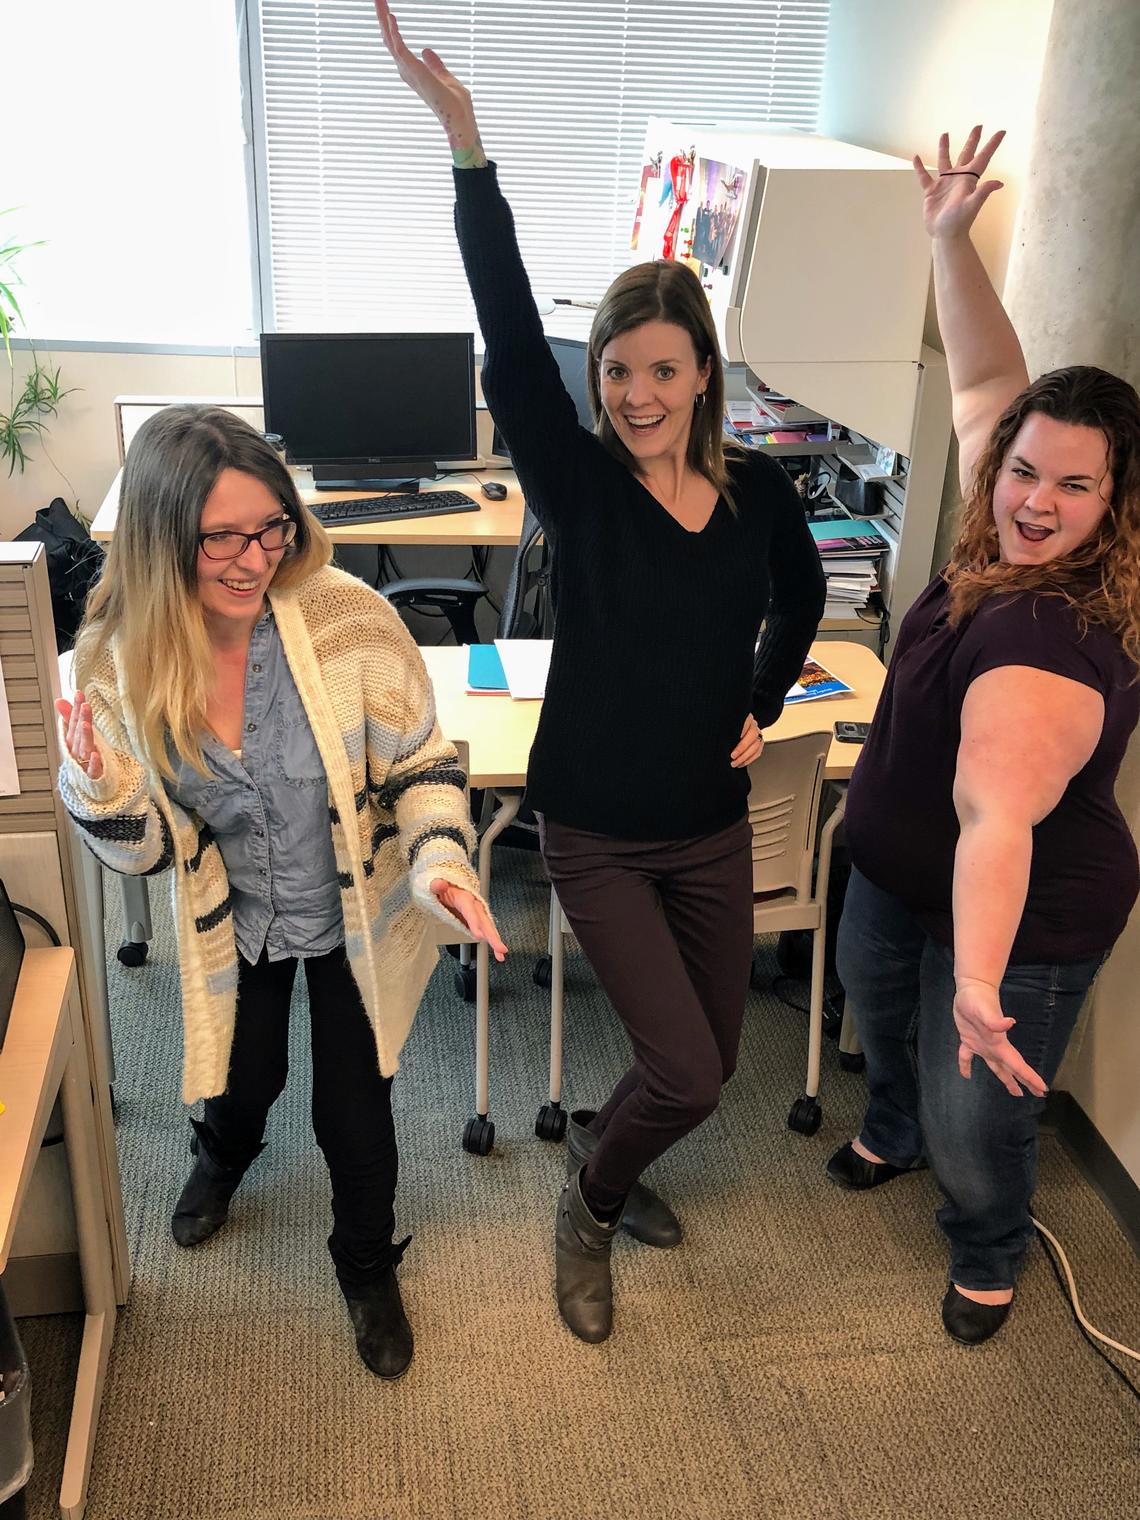 Cumming School of Medicine’s Working Our Way to Wellness (WoWW) members dance in their office, from left: Katie Flynn, Stephanie Hawes and Jennifer McCarty.